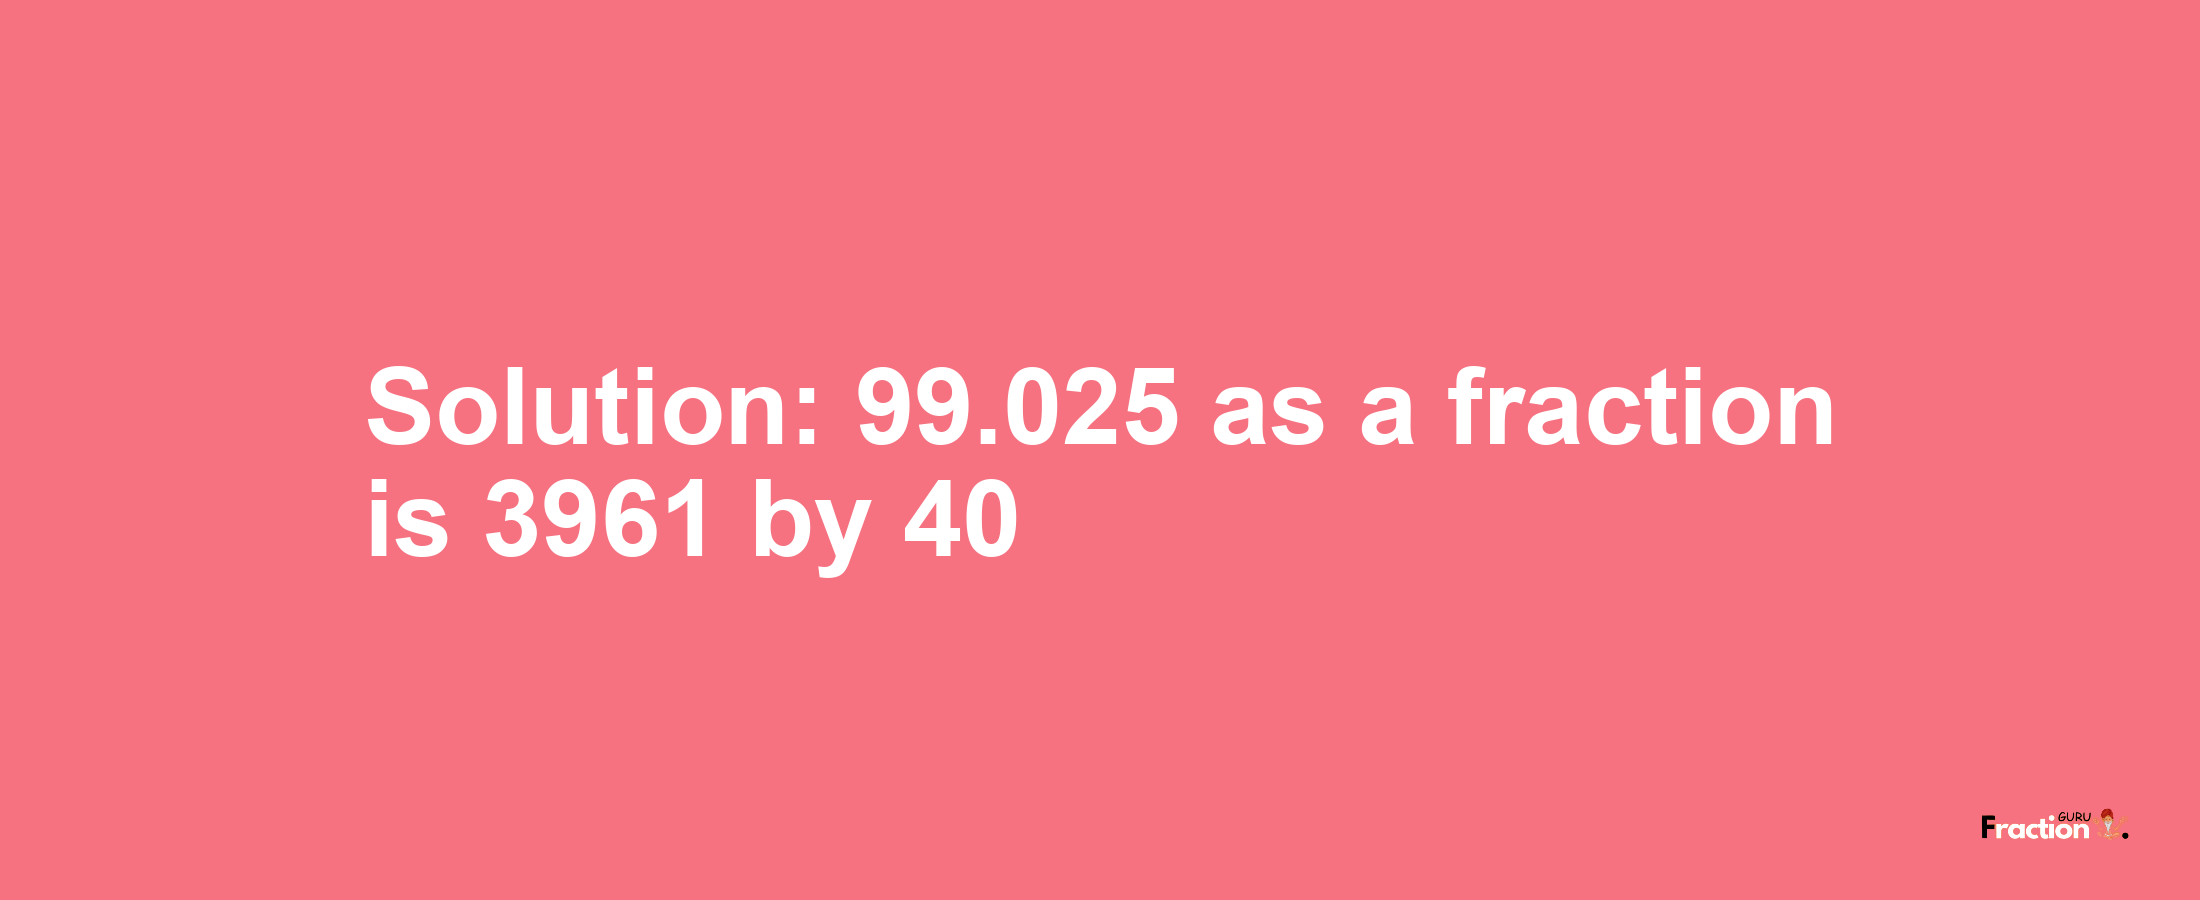 Solution:99.025 as a fraction is 3961/40